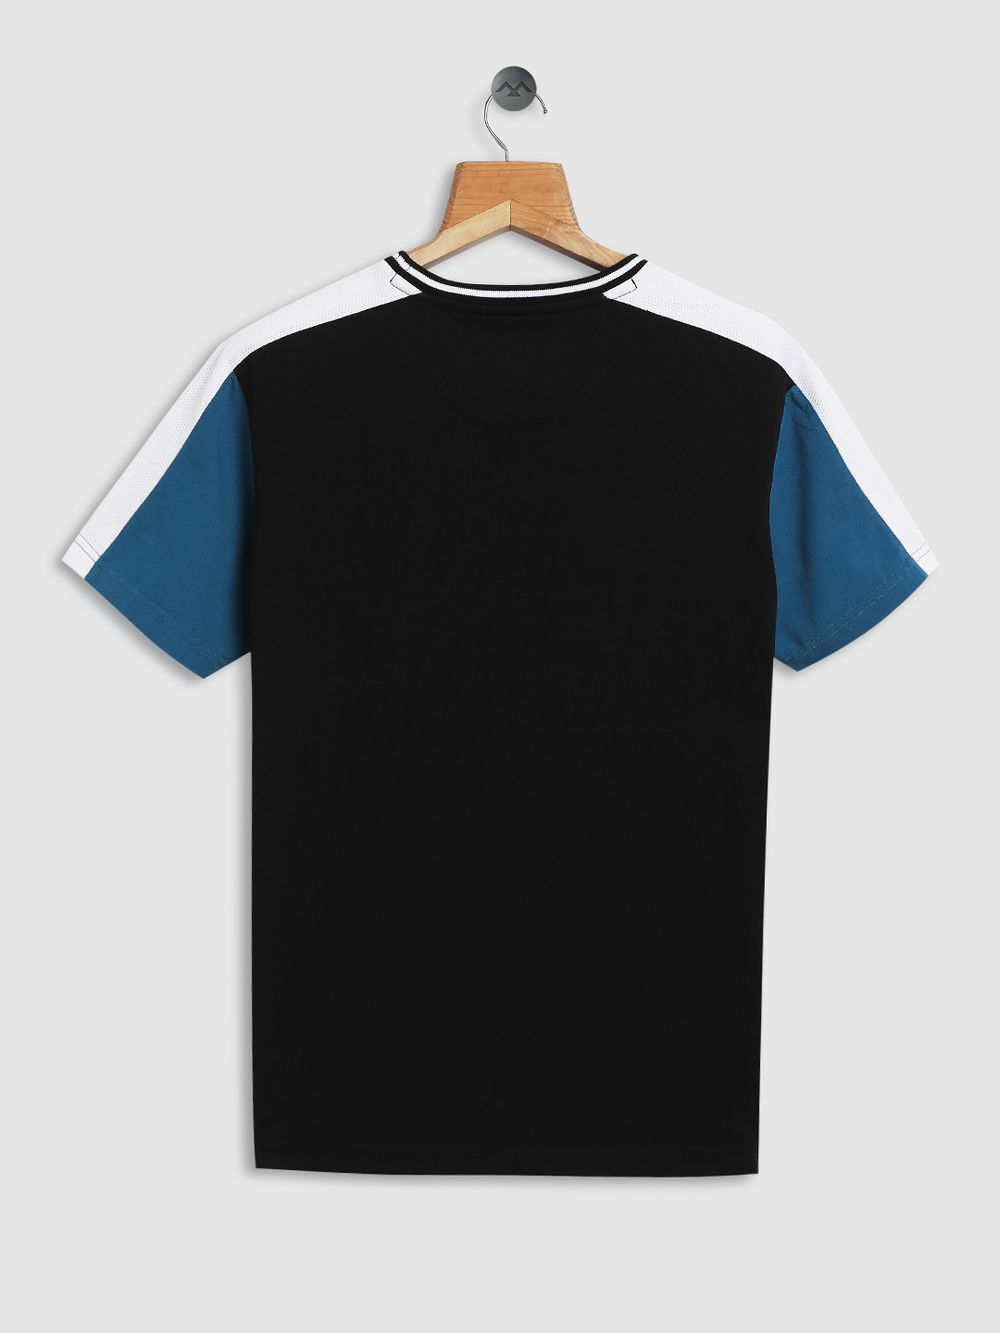 Black & Teal Cut & Sew Knitted Jersey T-Shirt